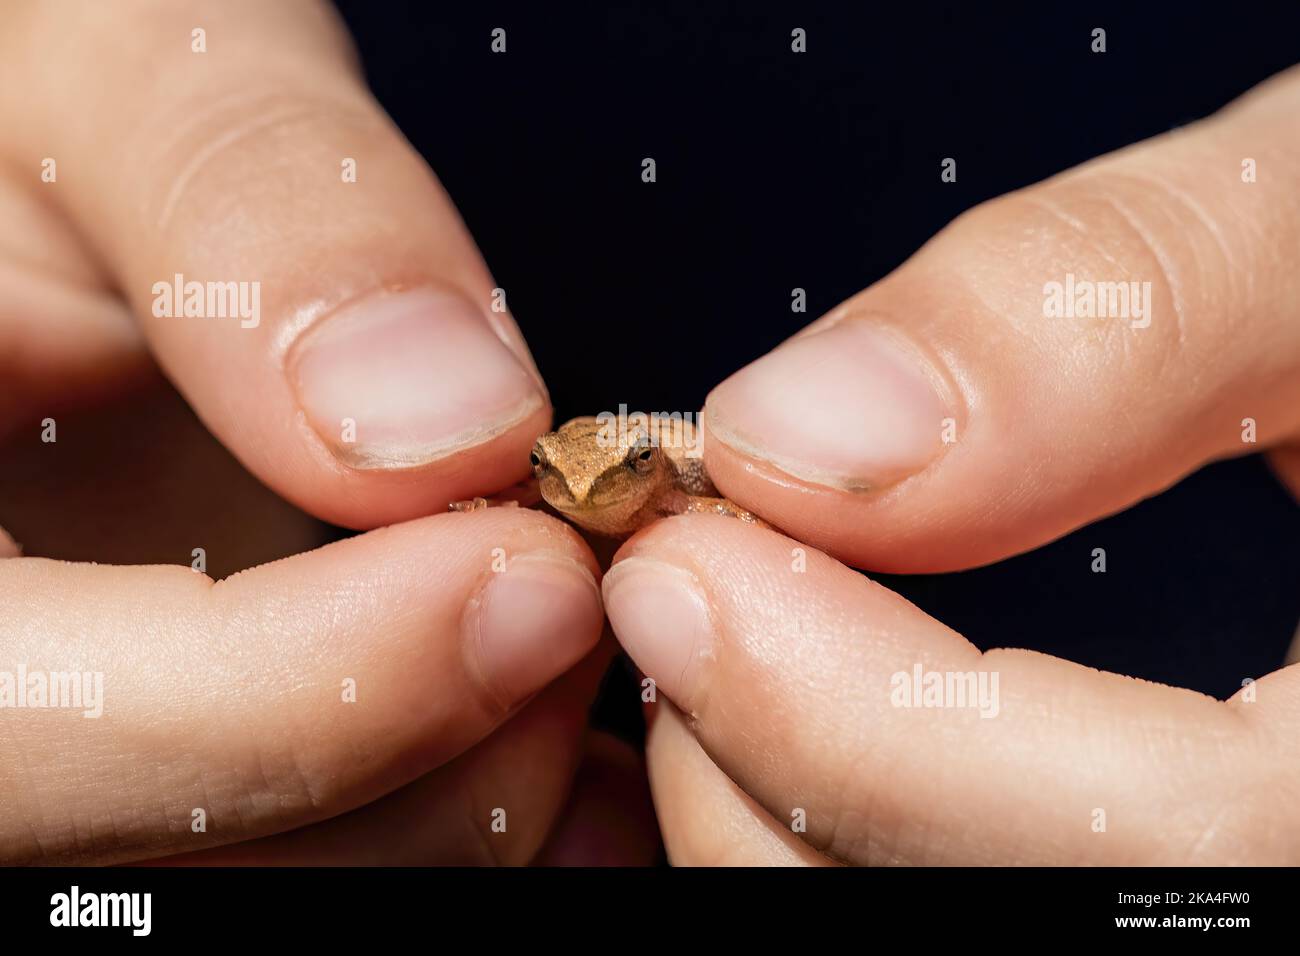 Young girl holding a tiny spring peeper frog between her fingers in Taylors Falls, Minnesota USA. Stock Photo